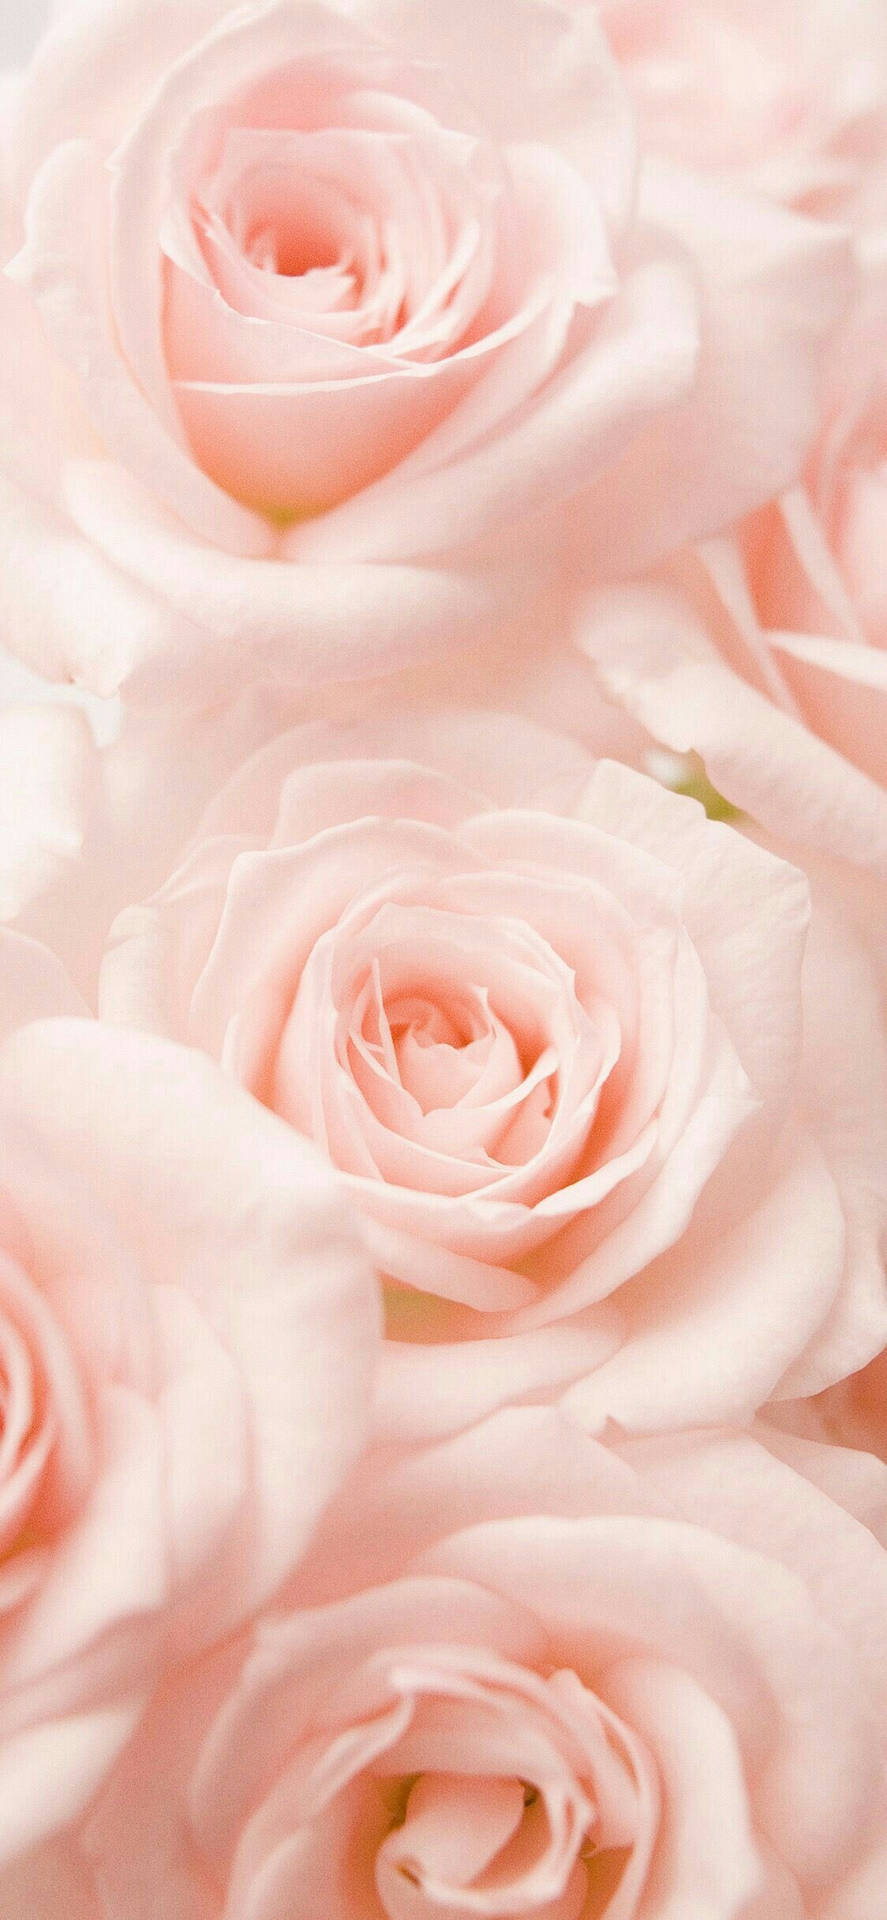 Blooming Aesthetic: A Collection Of Stunning Flowers For Iphone Wallpaper